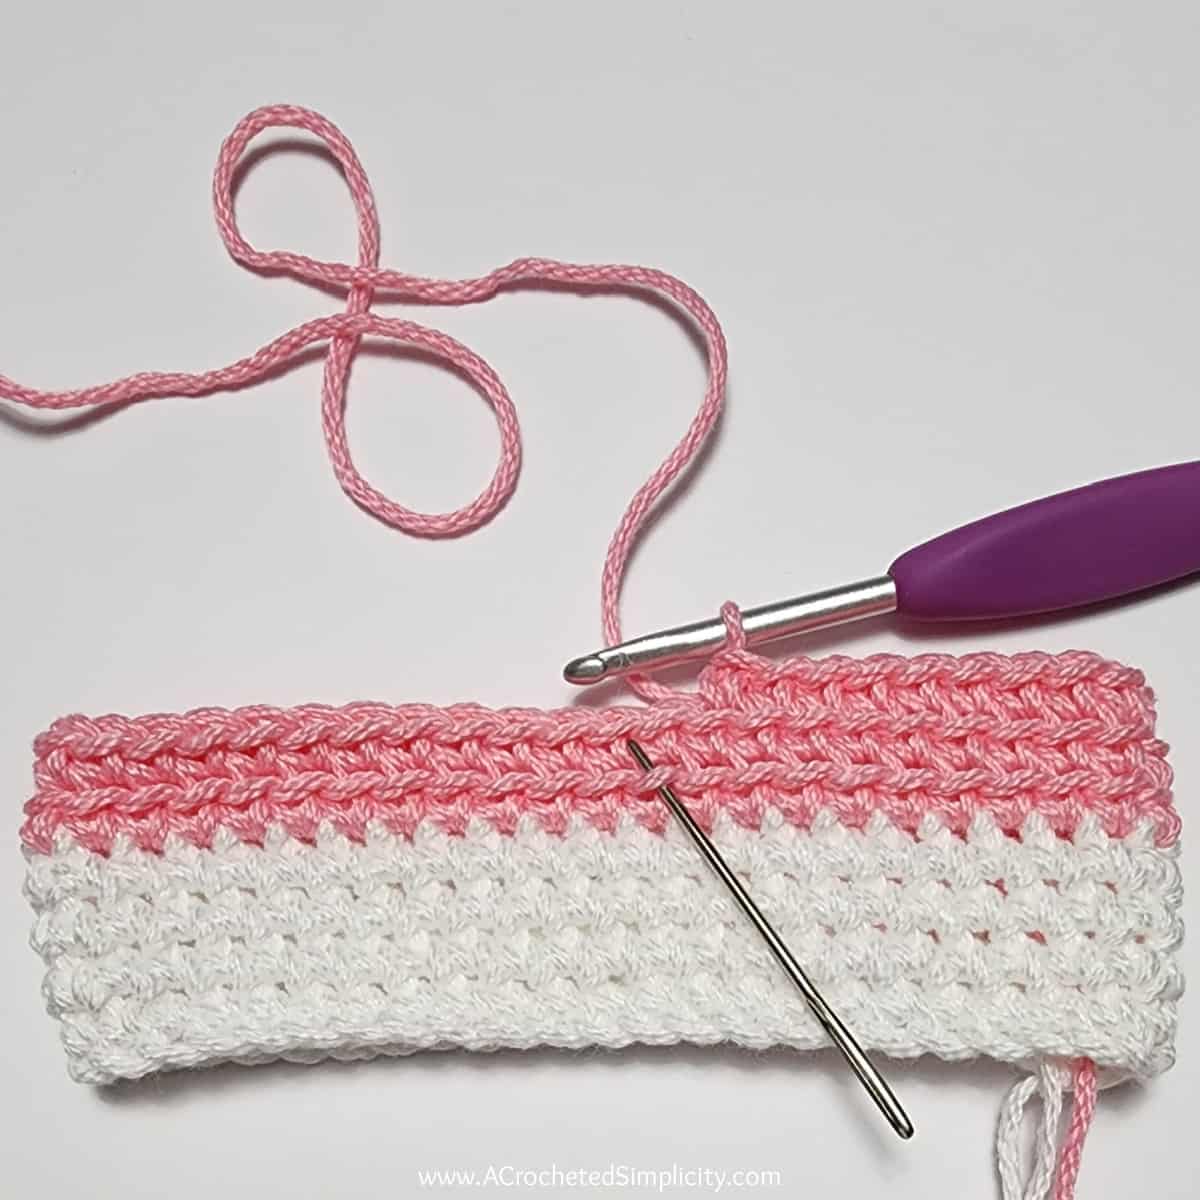 Crochet Valentine's Day treat bag tutorial photo in pink and white yarn showing where to work the next stitch.